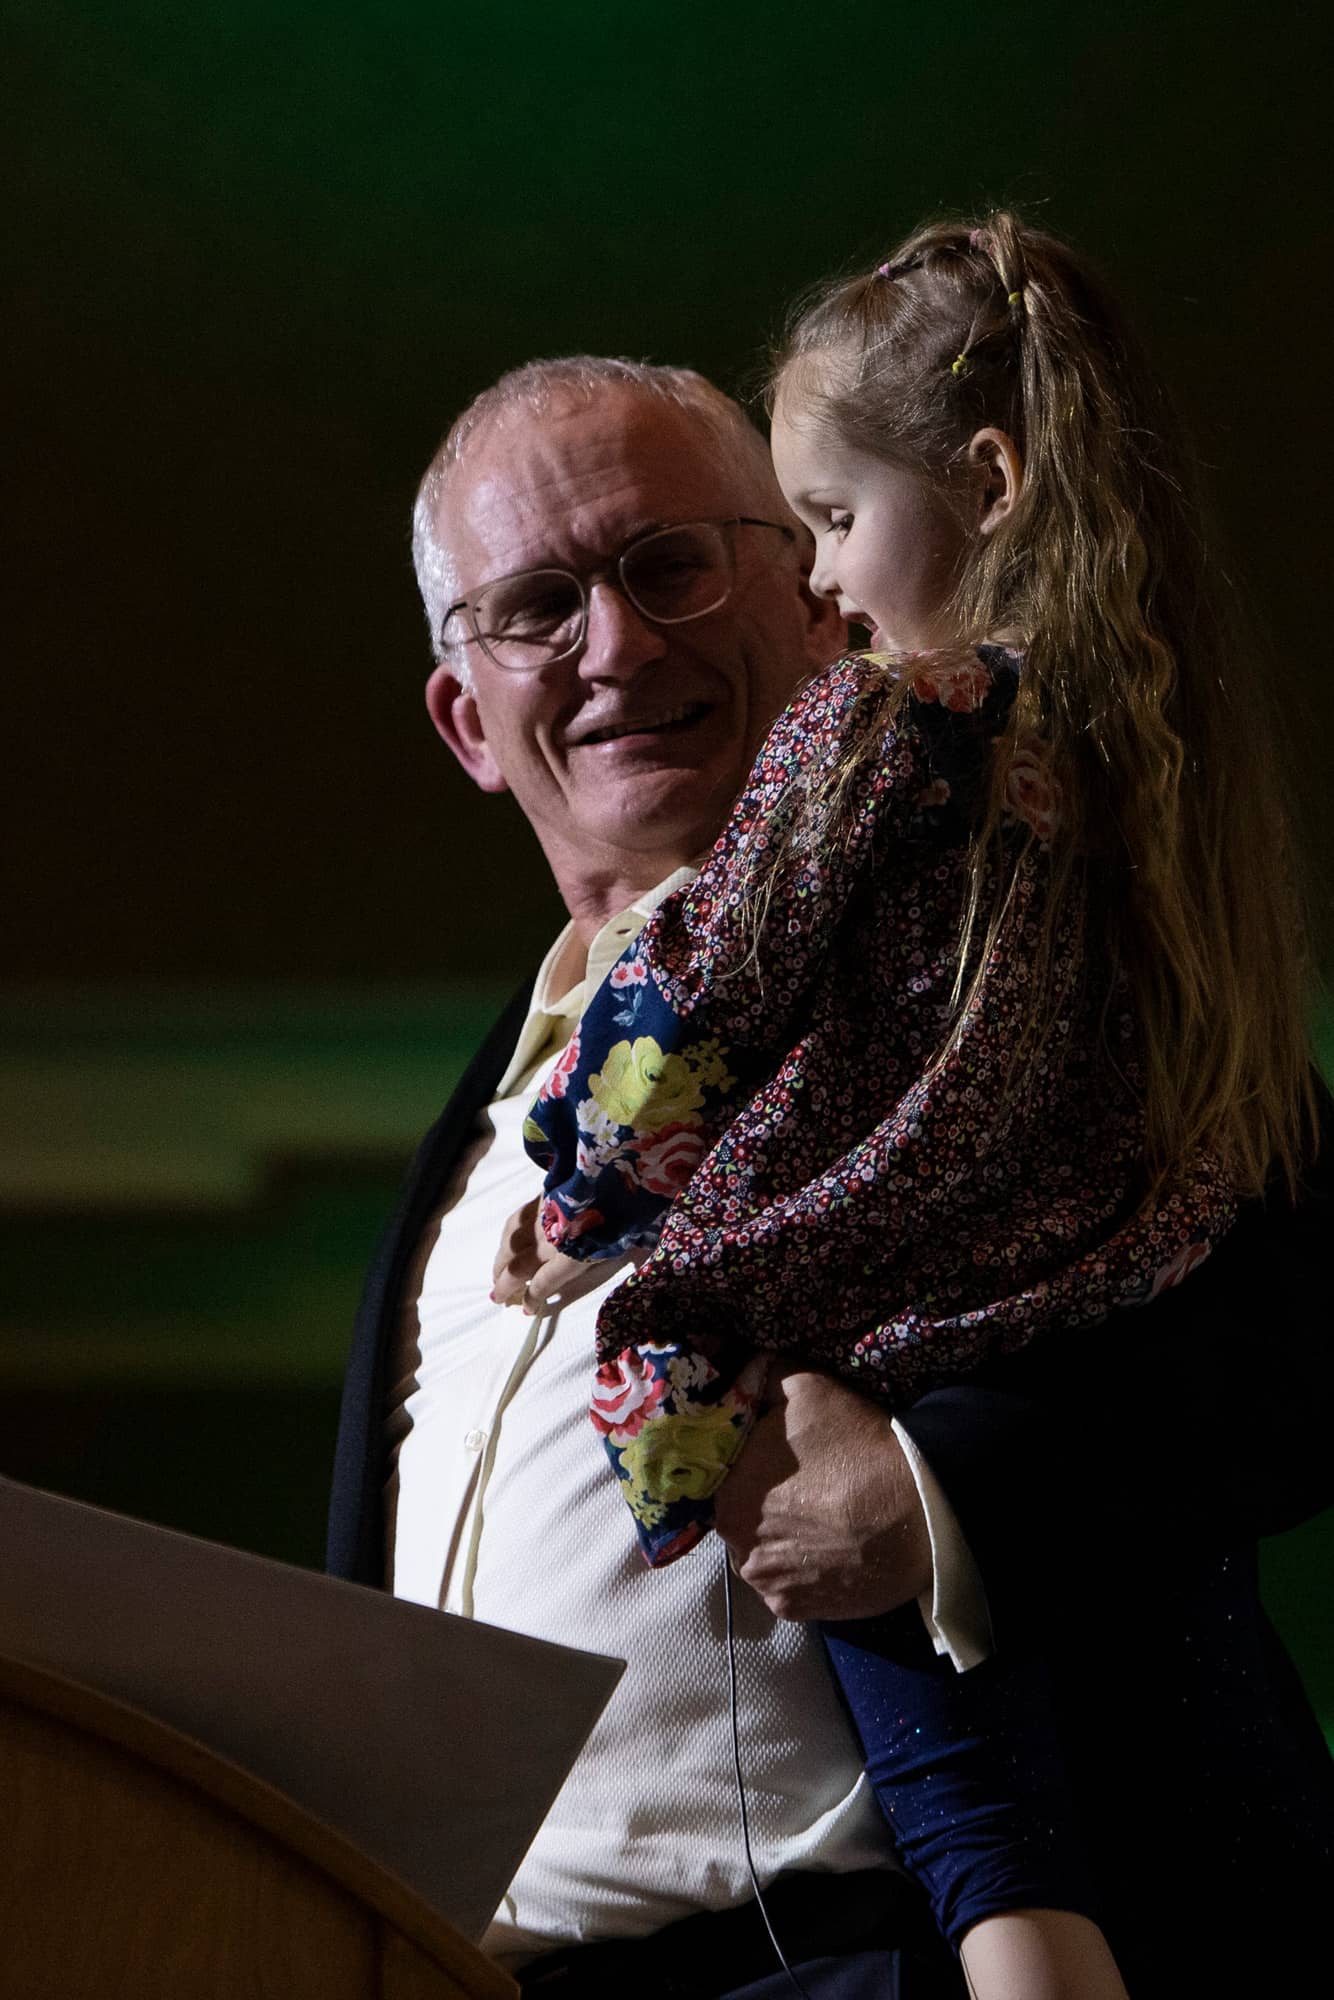 Dr. Evans’ granddaughter, Sophia, walked up onto the stage and joined him for part of his lecture.